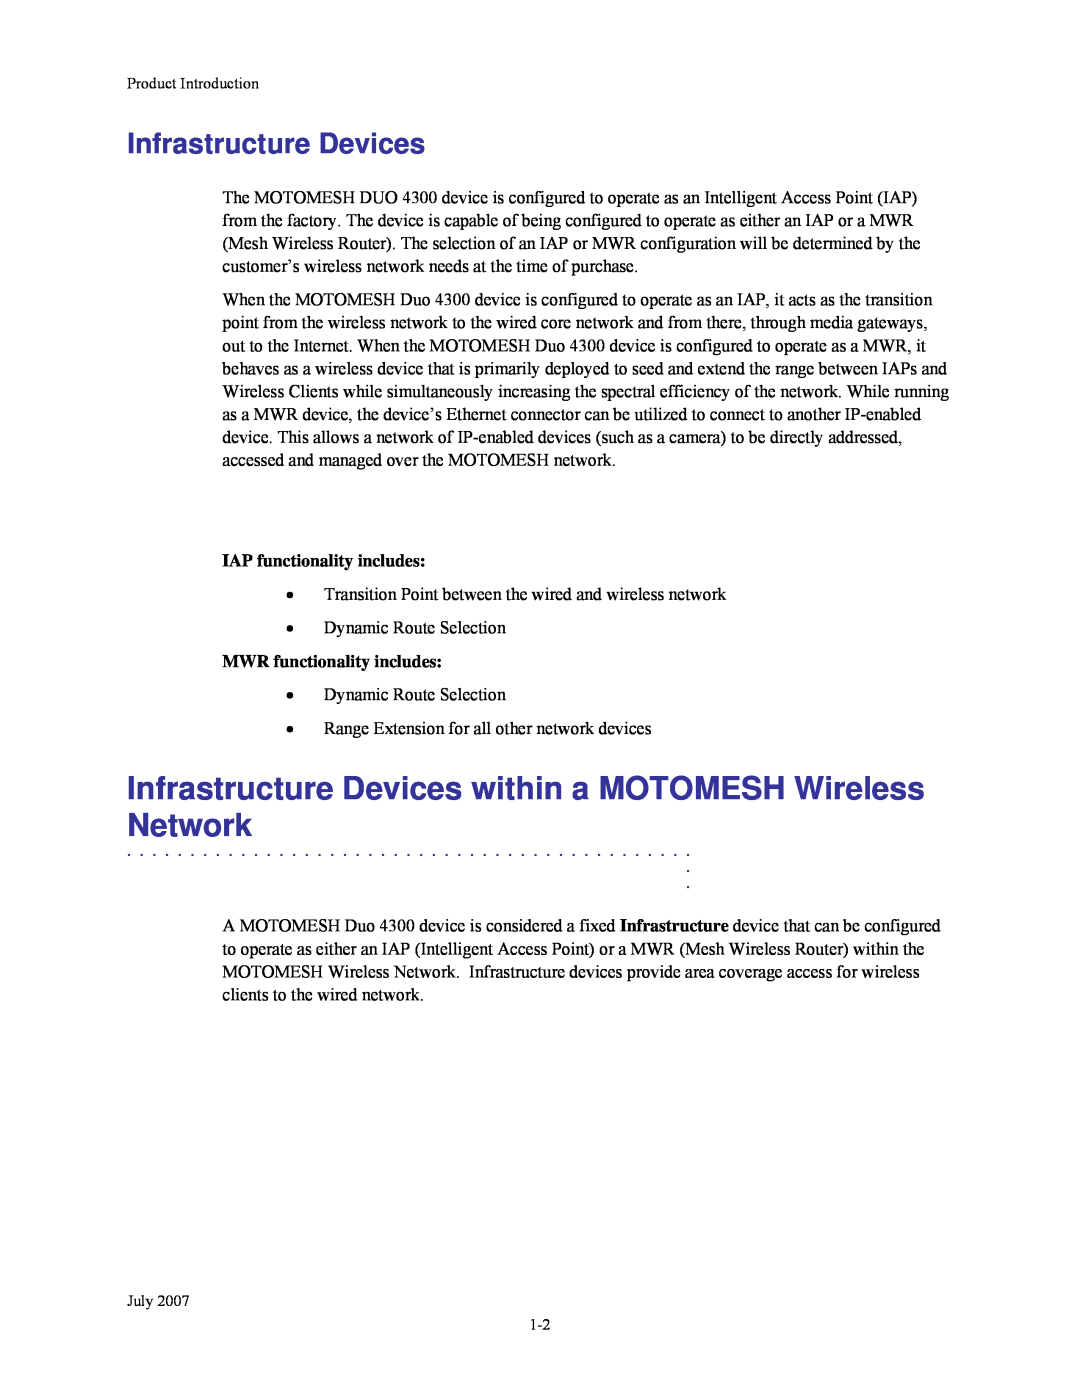 Nikon 4300 manual Infrastructure Devices within a MOTOMESH Wireless Network, IAP functionality includes 